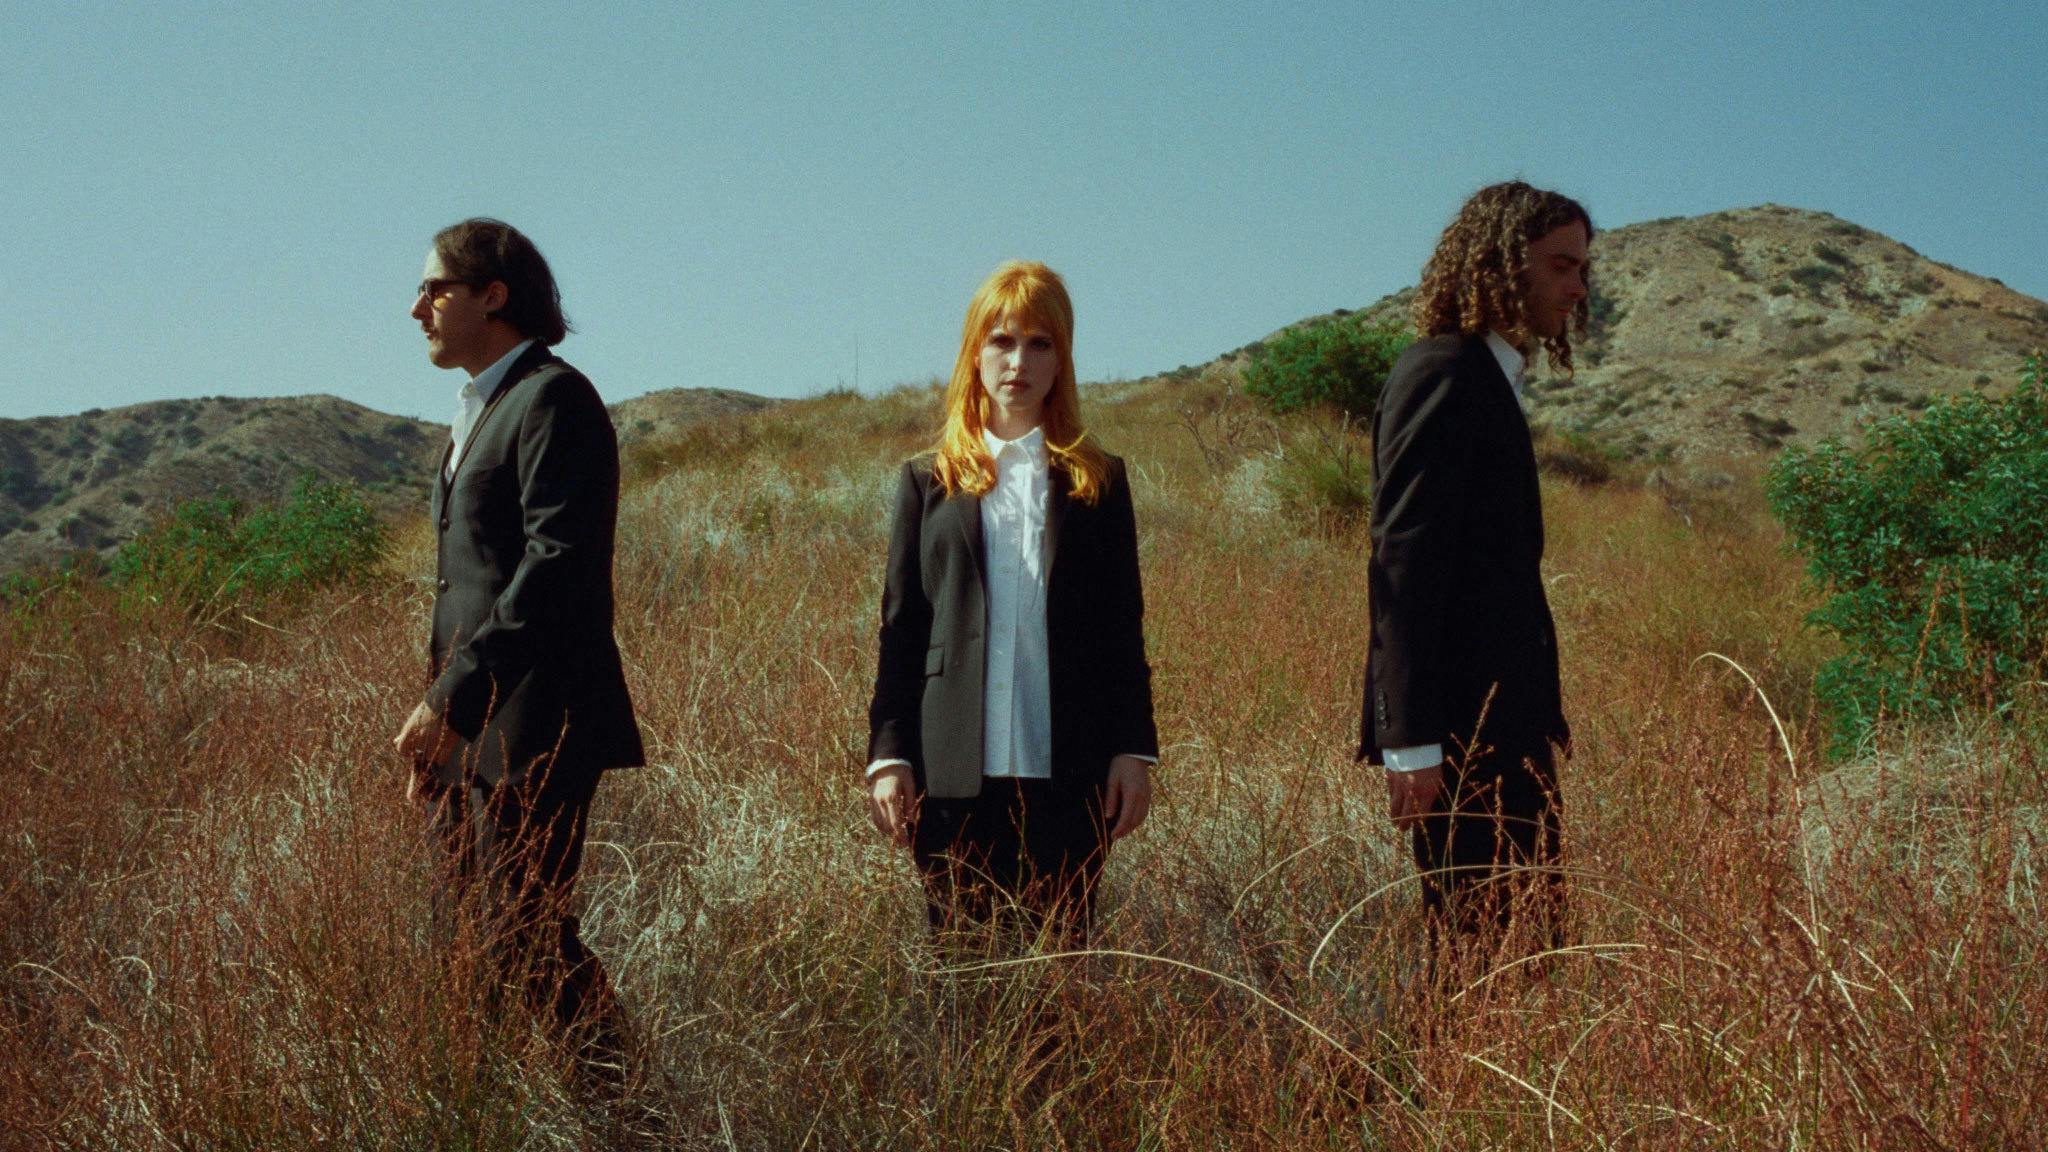 Paramore: “It’s the balance between apathy and righteous rage that motivates you to action”